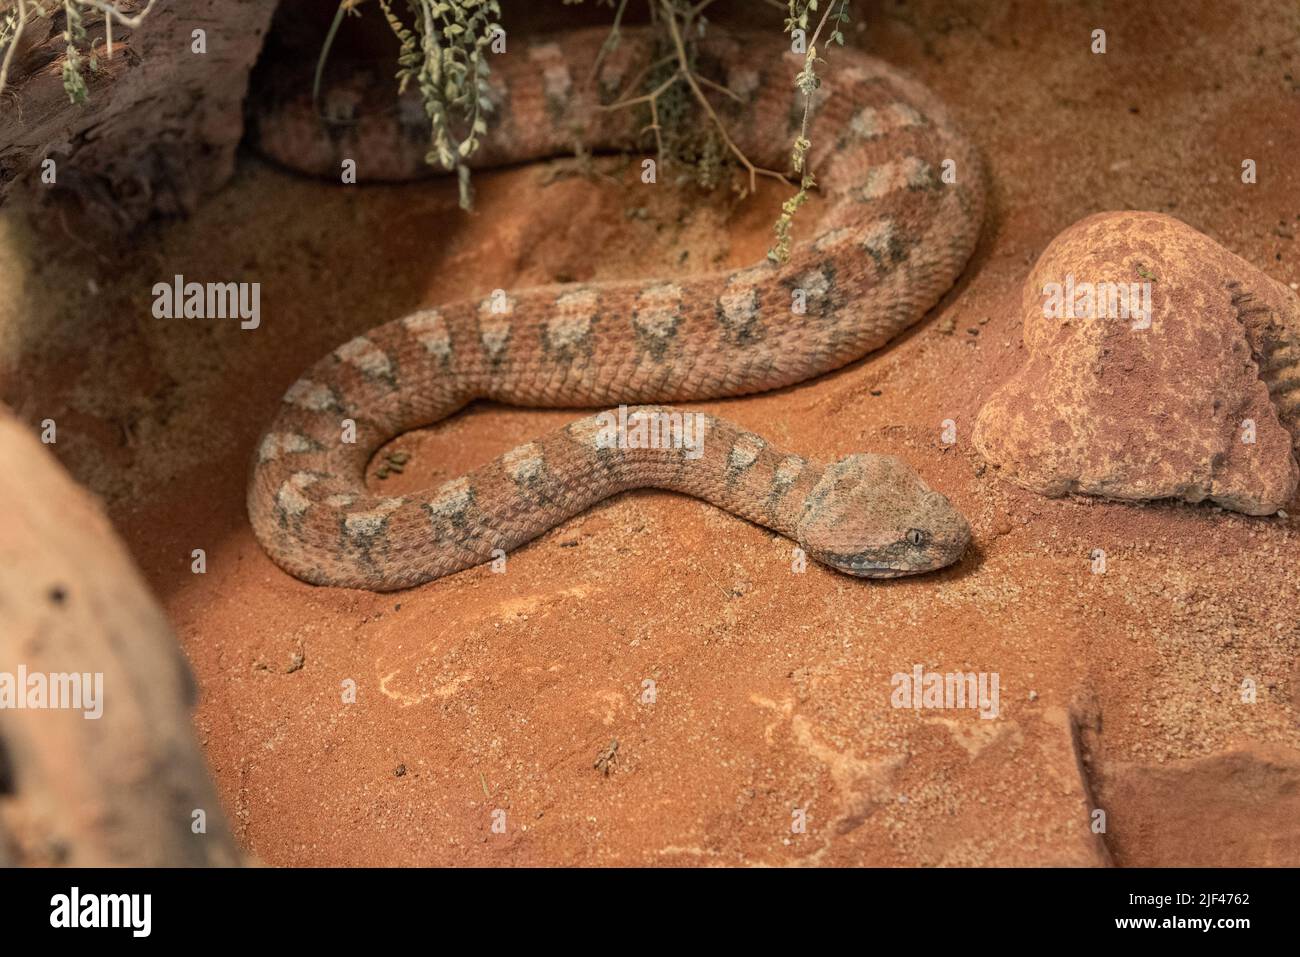 Portrait of a snake in nature in Palestine. Palestinian viper Stock Photo